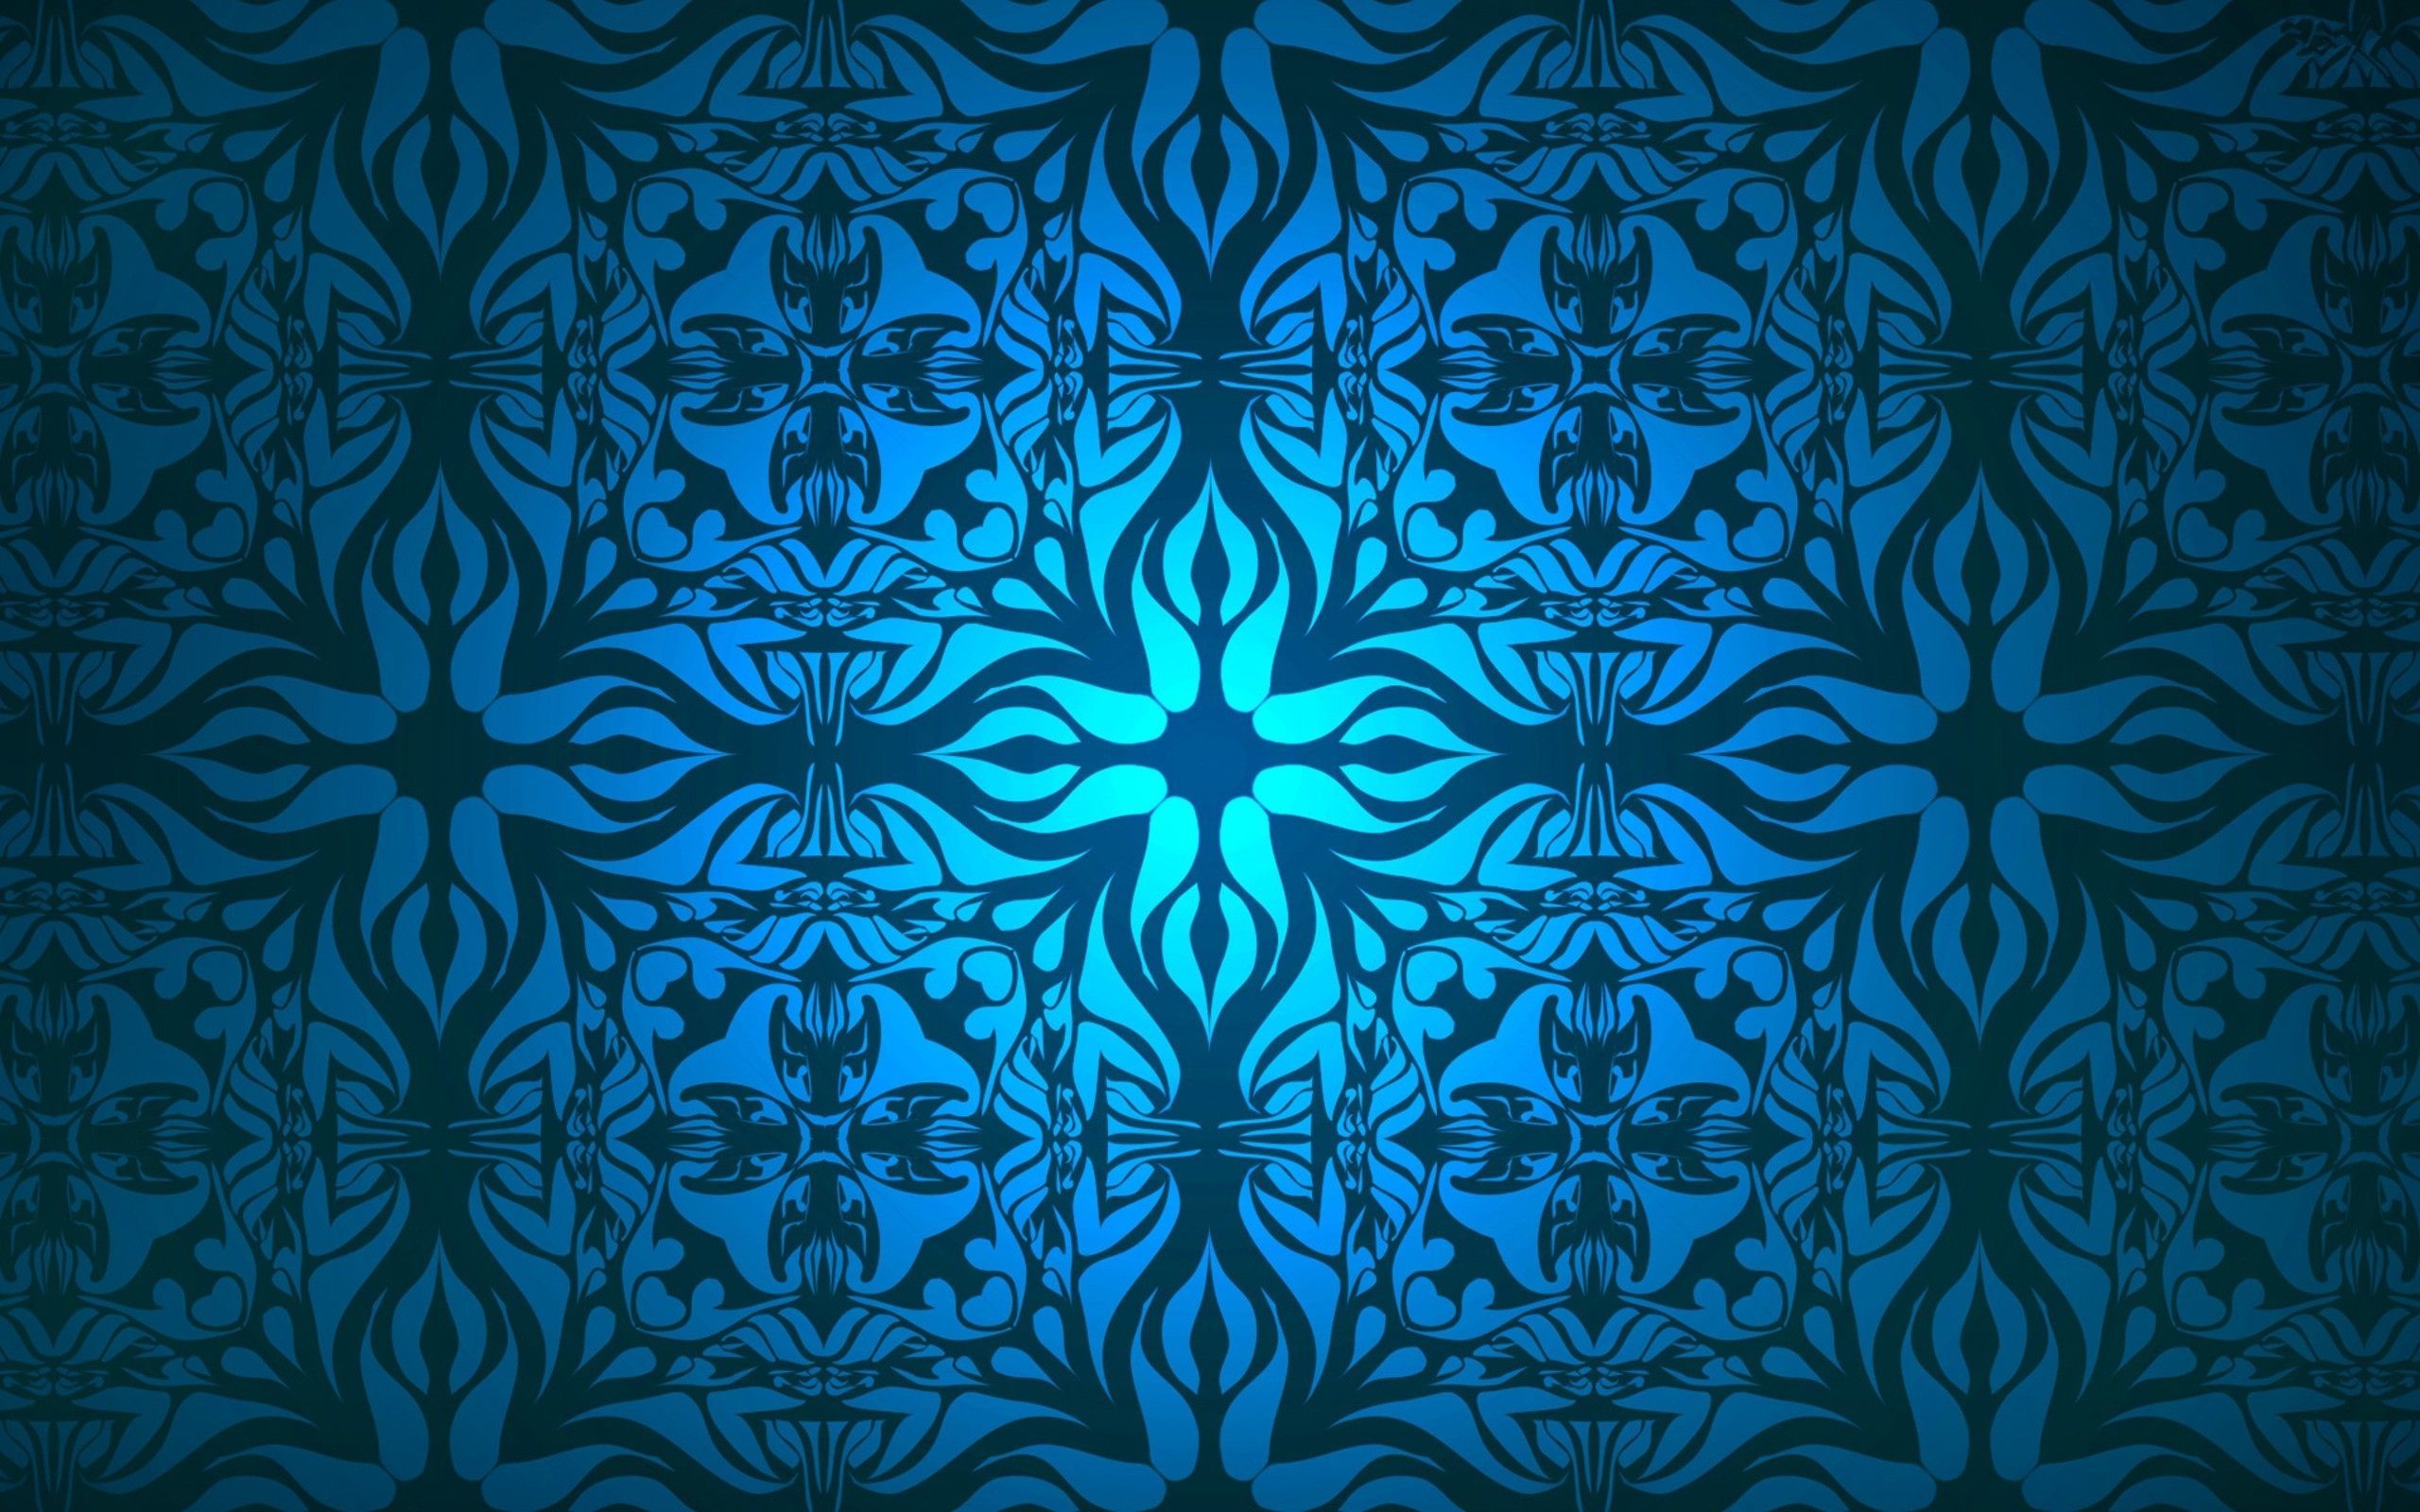 Black And Blue Pattern Wallpaper Gallery. Pattern wallpaper, Blue background patterns, Background patterns